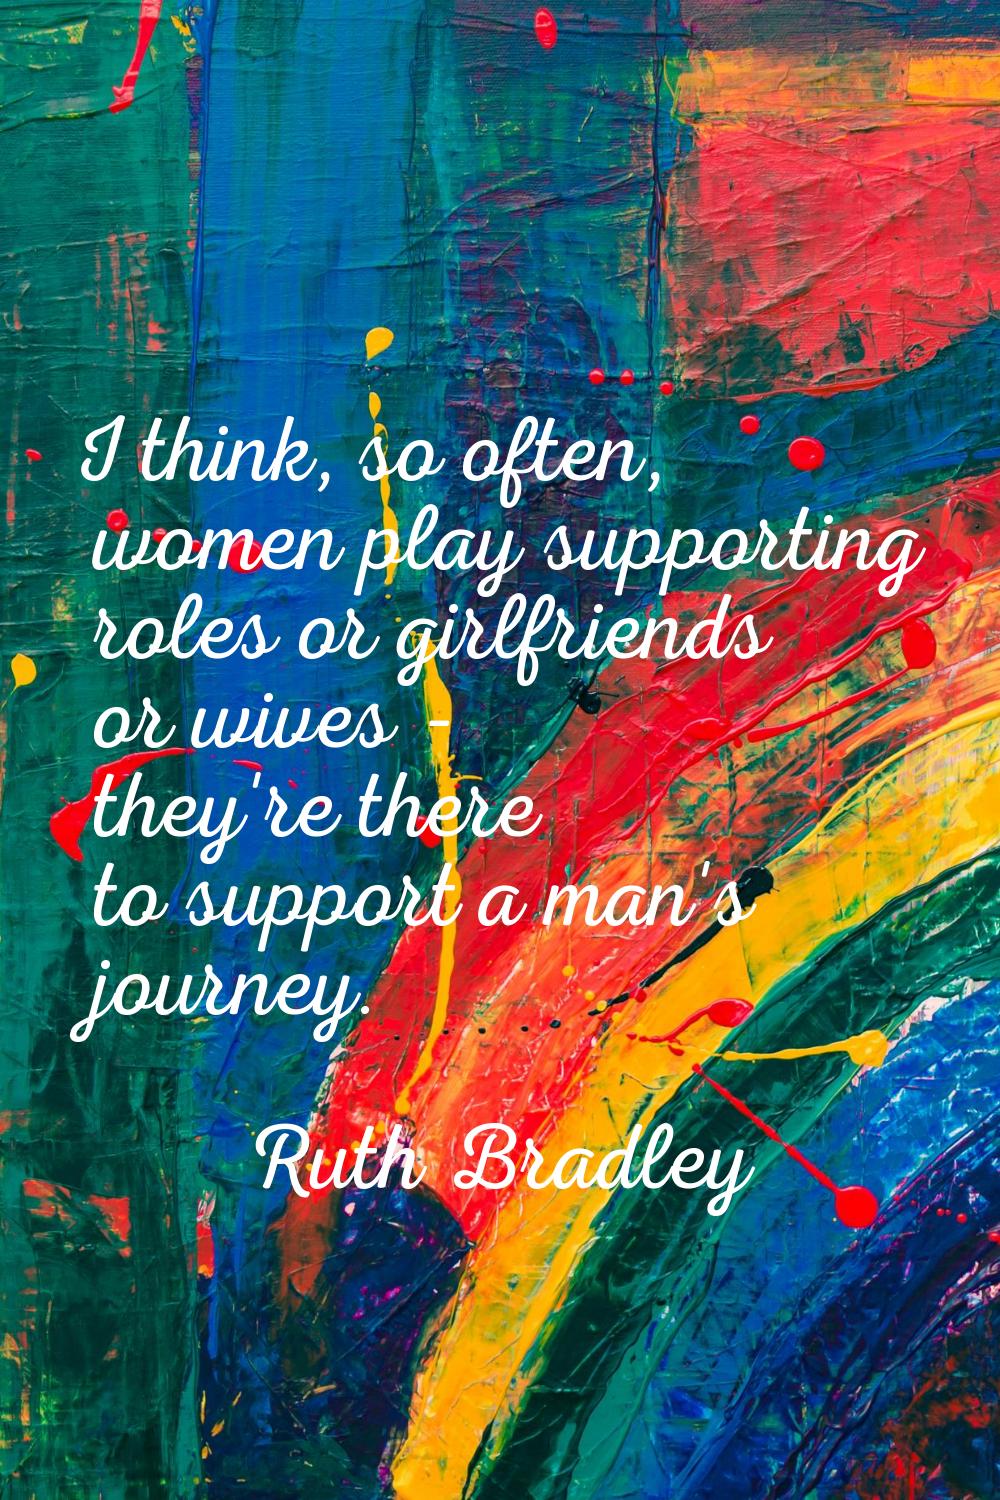 I think, so often, women play supporting roles or girlfriends or wives - they're there to support a